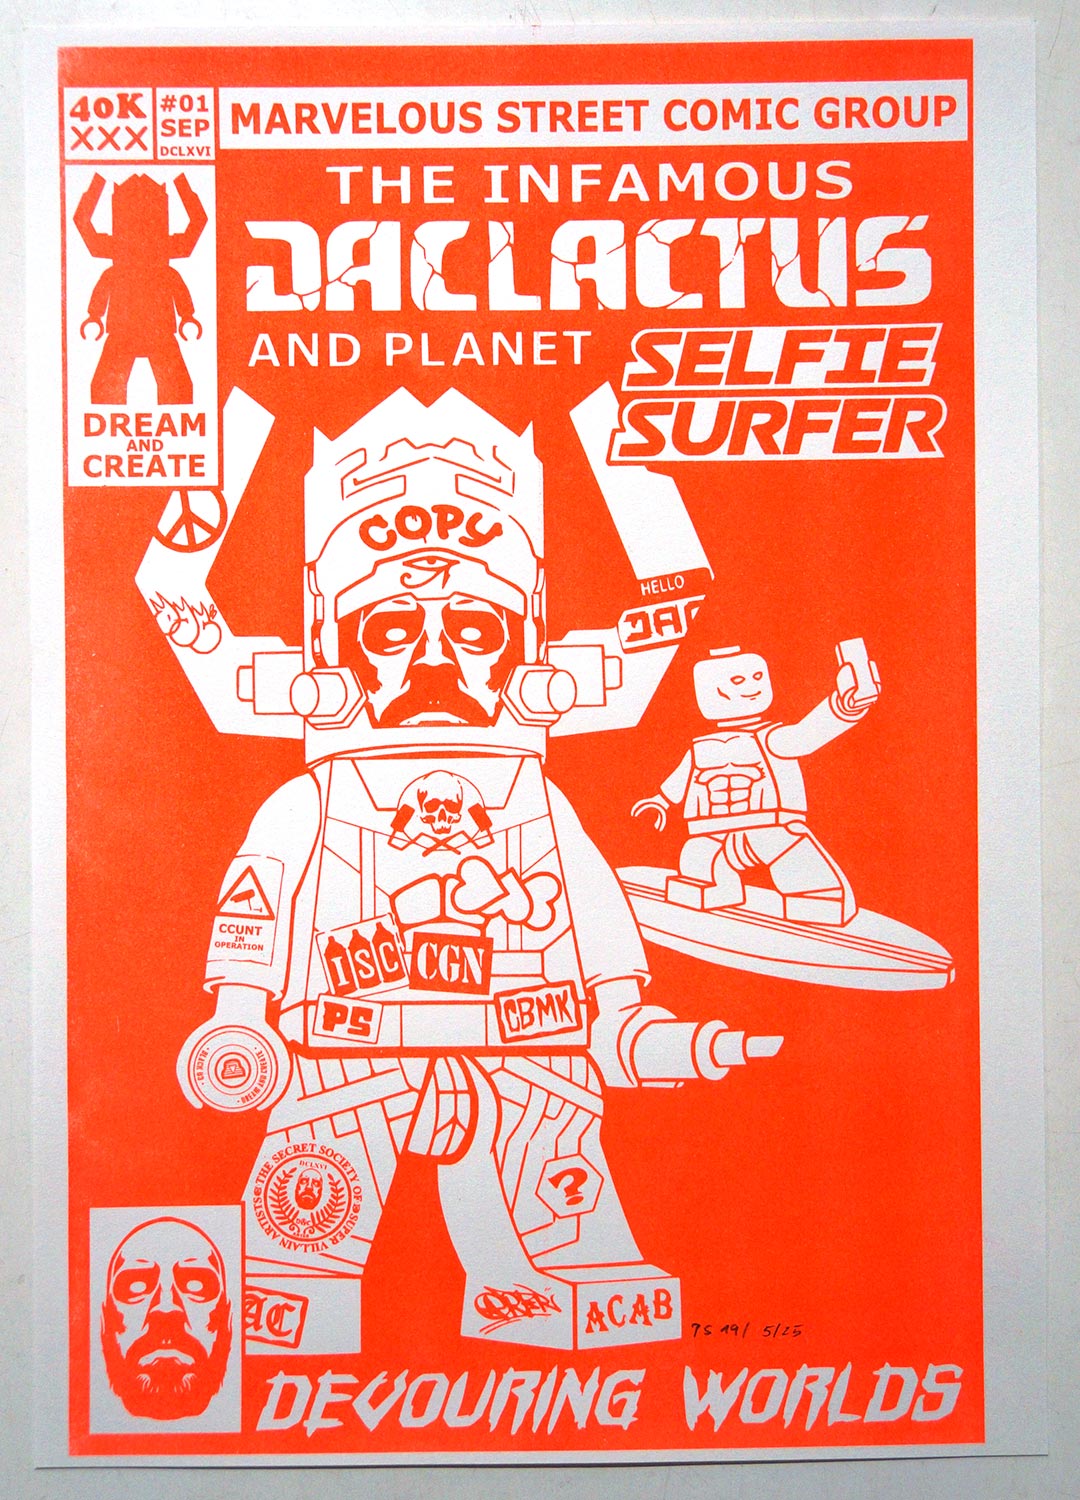 Planet Selfie and Dacater: "The Infamous Jaclactus And Planet Selfie Surfer" - Risograph print at SALZIG Berlin